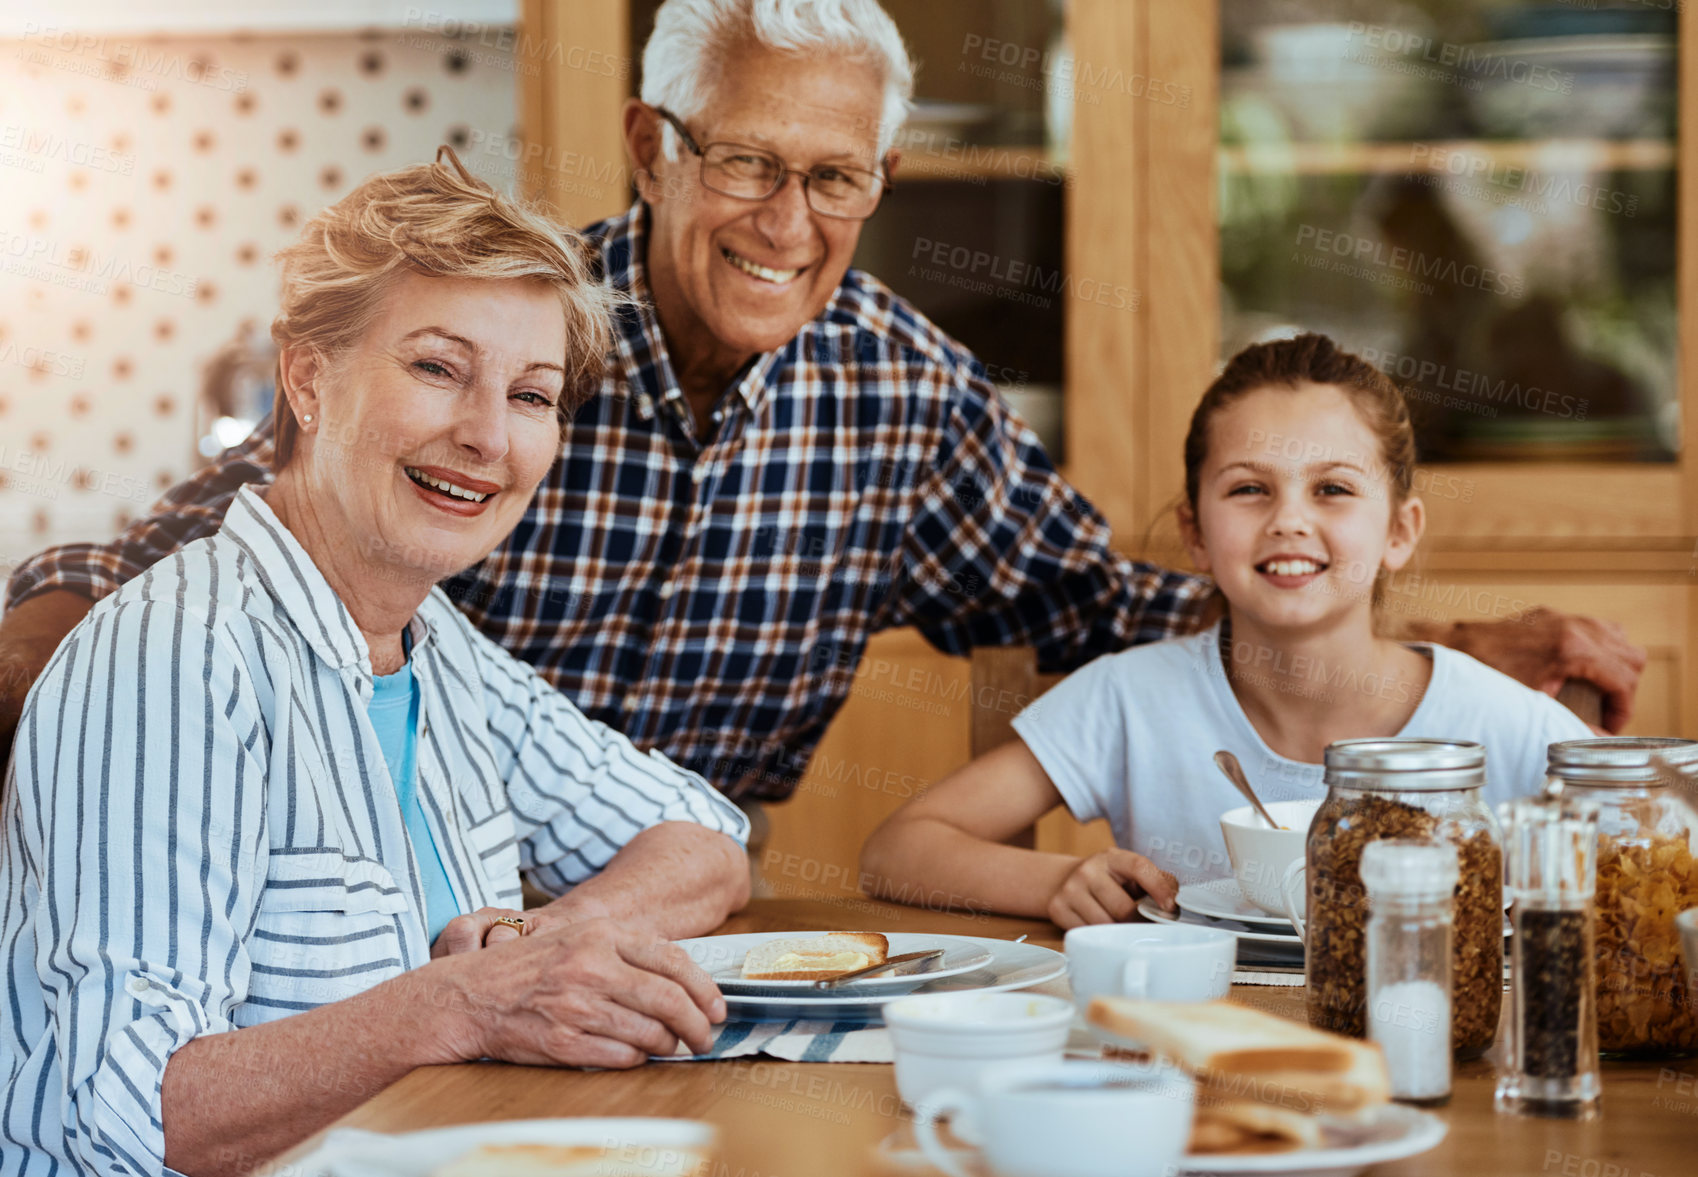 Buy stock photo Portrait of a little girl having breakfast with her grandparents at home